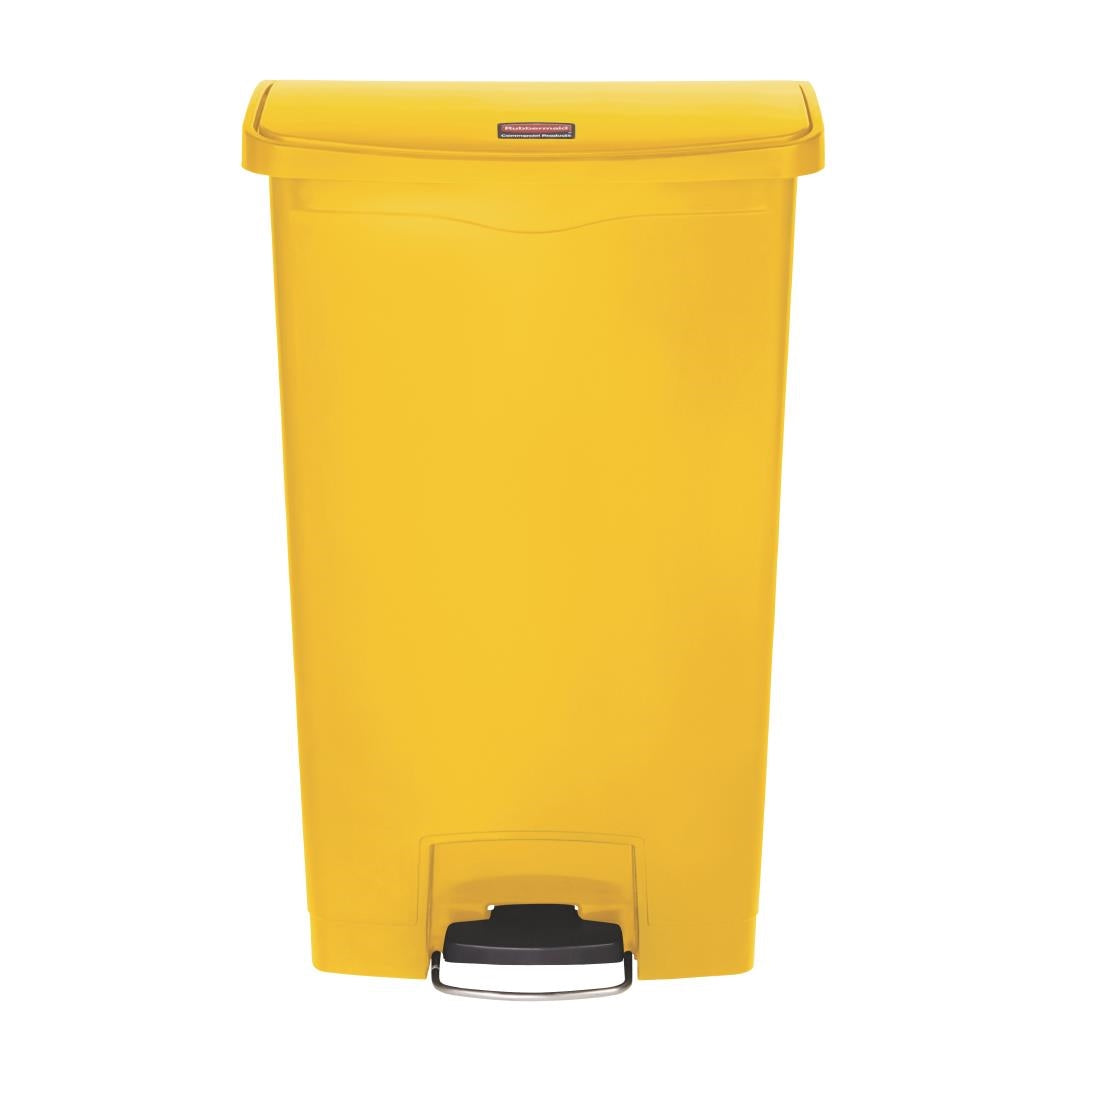 CW589 Rubbermaid Slim Jim Step on Bin Front Pedal 68Ltr Yellow JD Catering Equipment Solutions Ltd